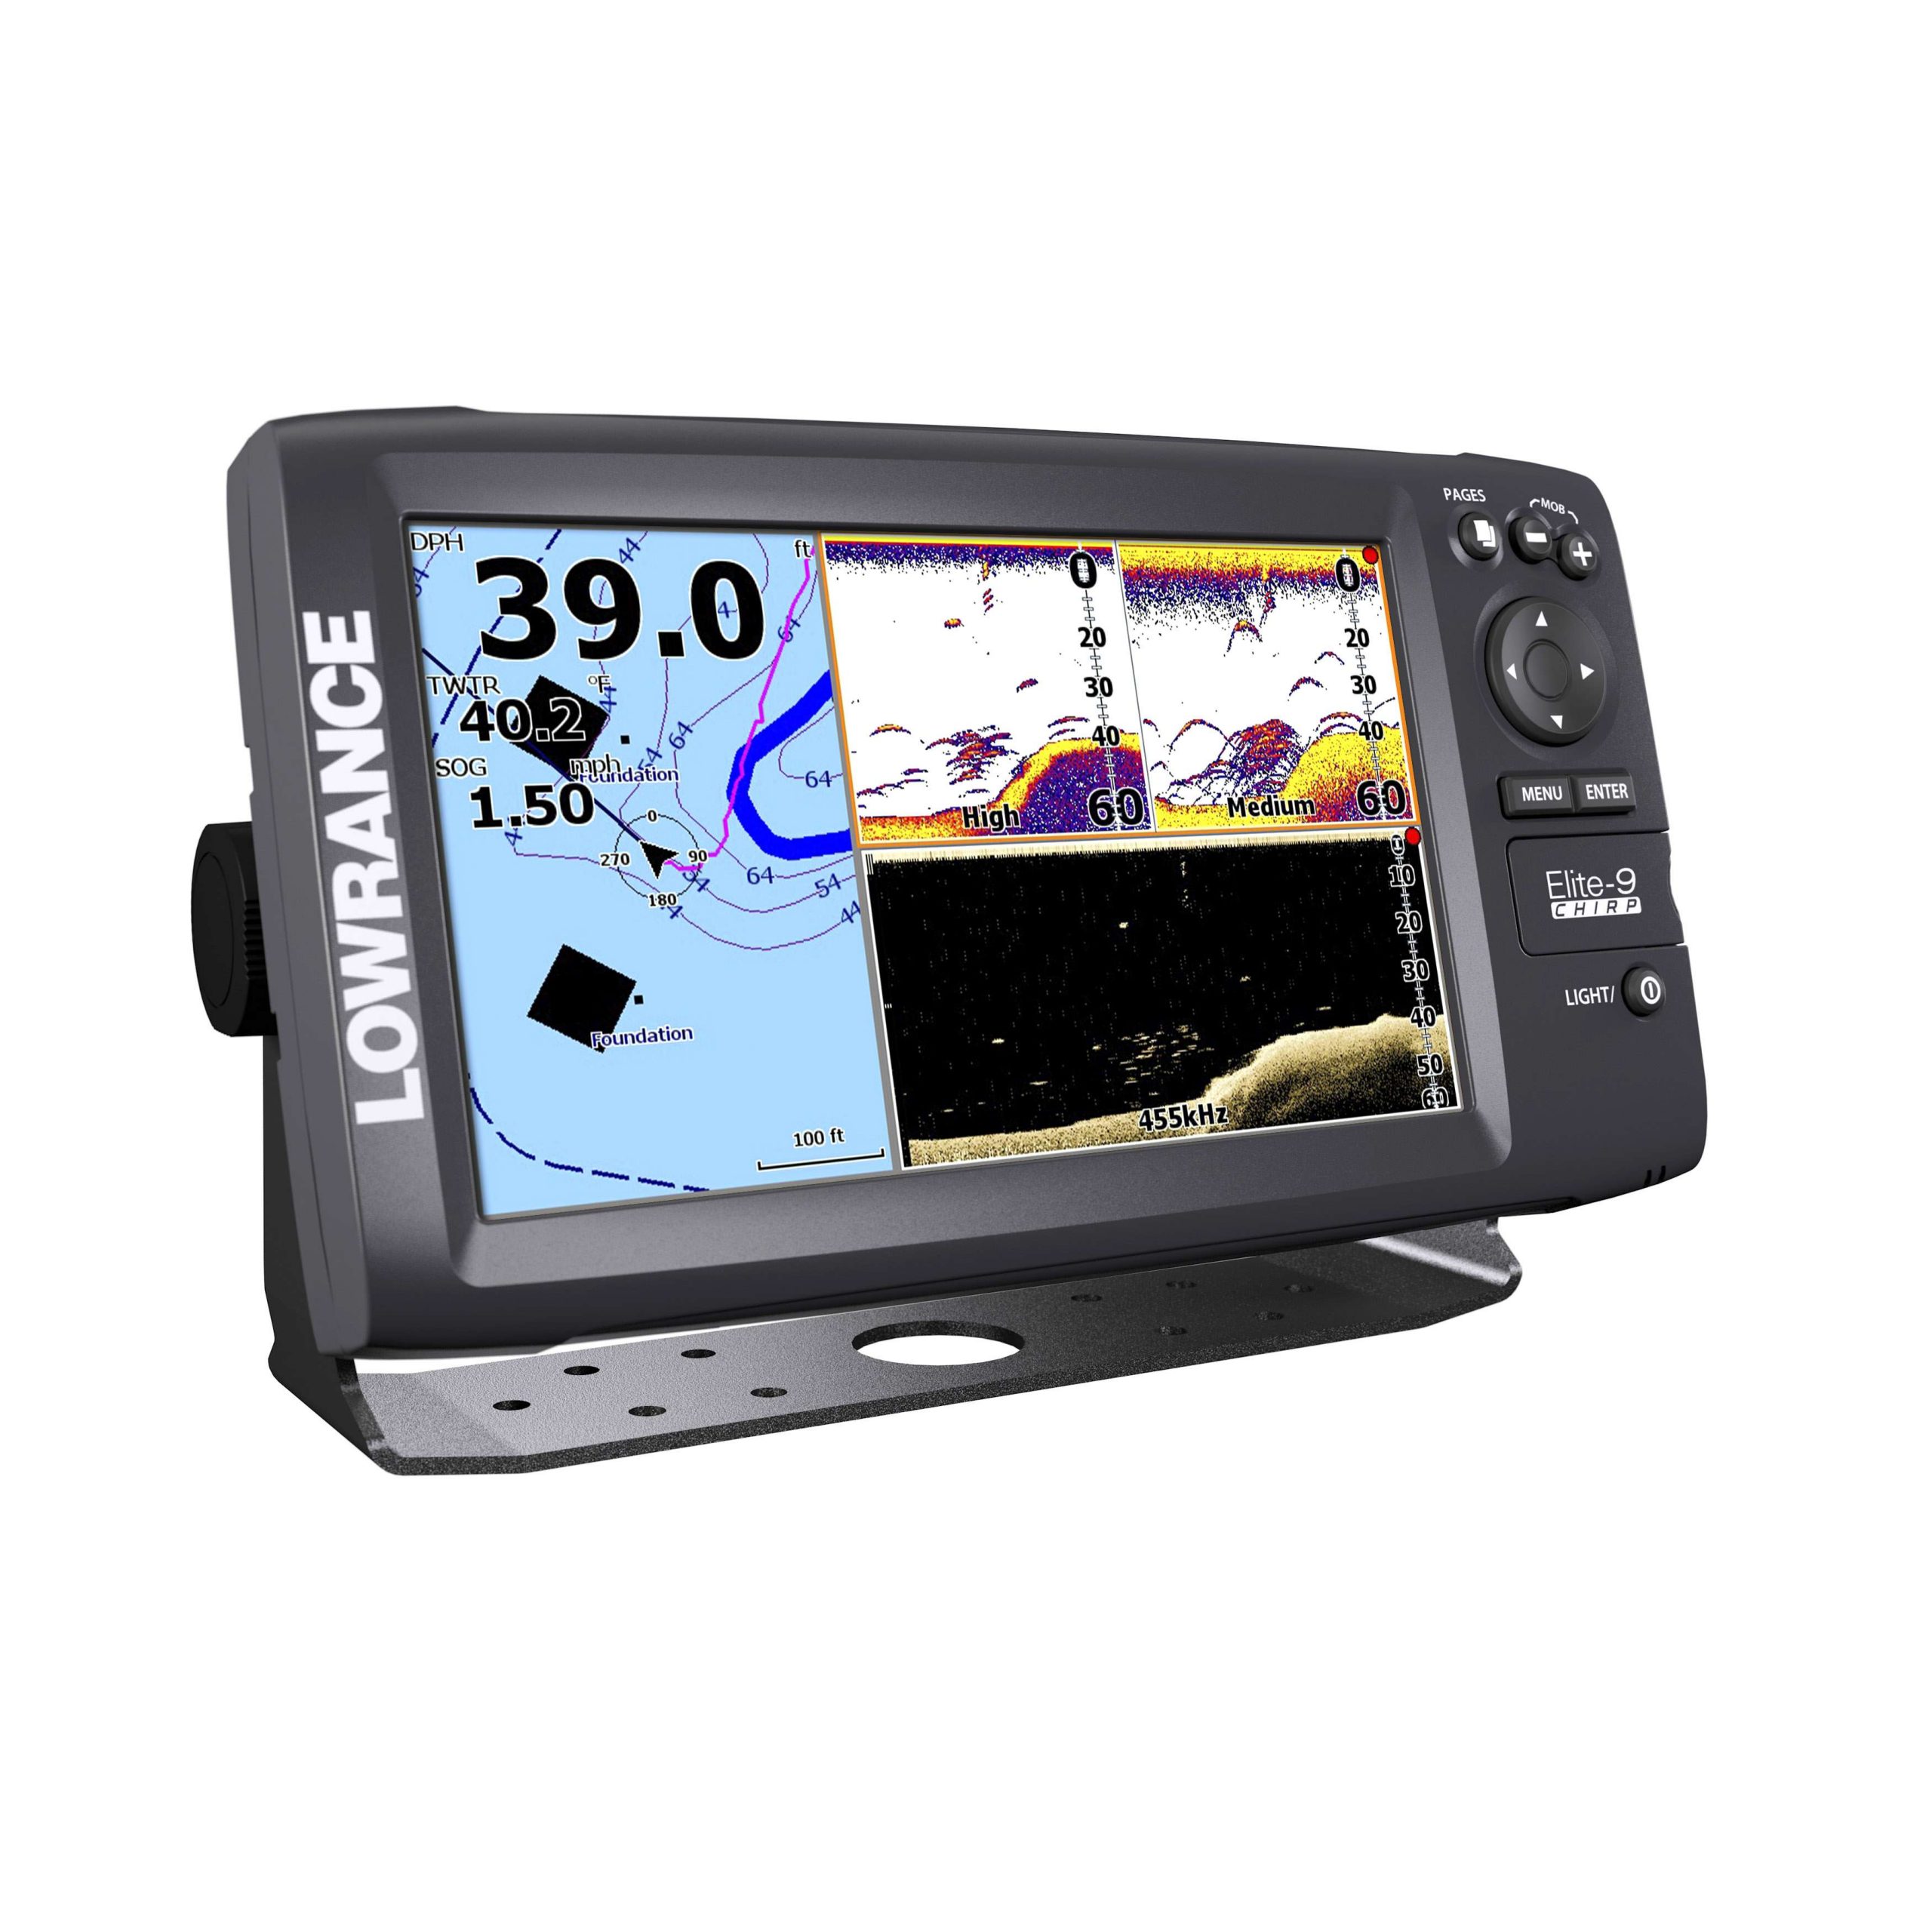 <B>LOWRANCE ELITE-9 CHIRP FISHFINDER/CHARTPLOTTER</b>
This unit becomes the largest in the companyâs CHIRP series, featuring a 9-inch widescreen SolarMAX Plus display. This sonar displays two user-selected ranges simultaneously, helping with target separation and better resolution while graphing at high speeds. The Elite-9 has a built-in GPS antenna and is compatible with the Insight Genesis map-creation service. It will retail for $1,399.